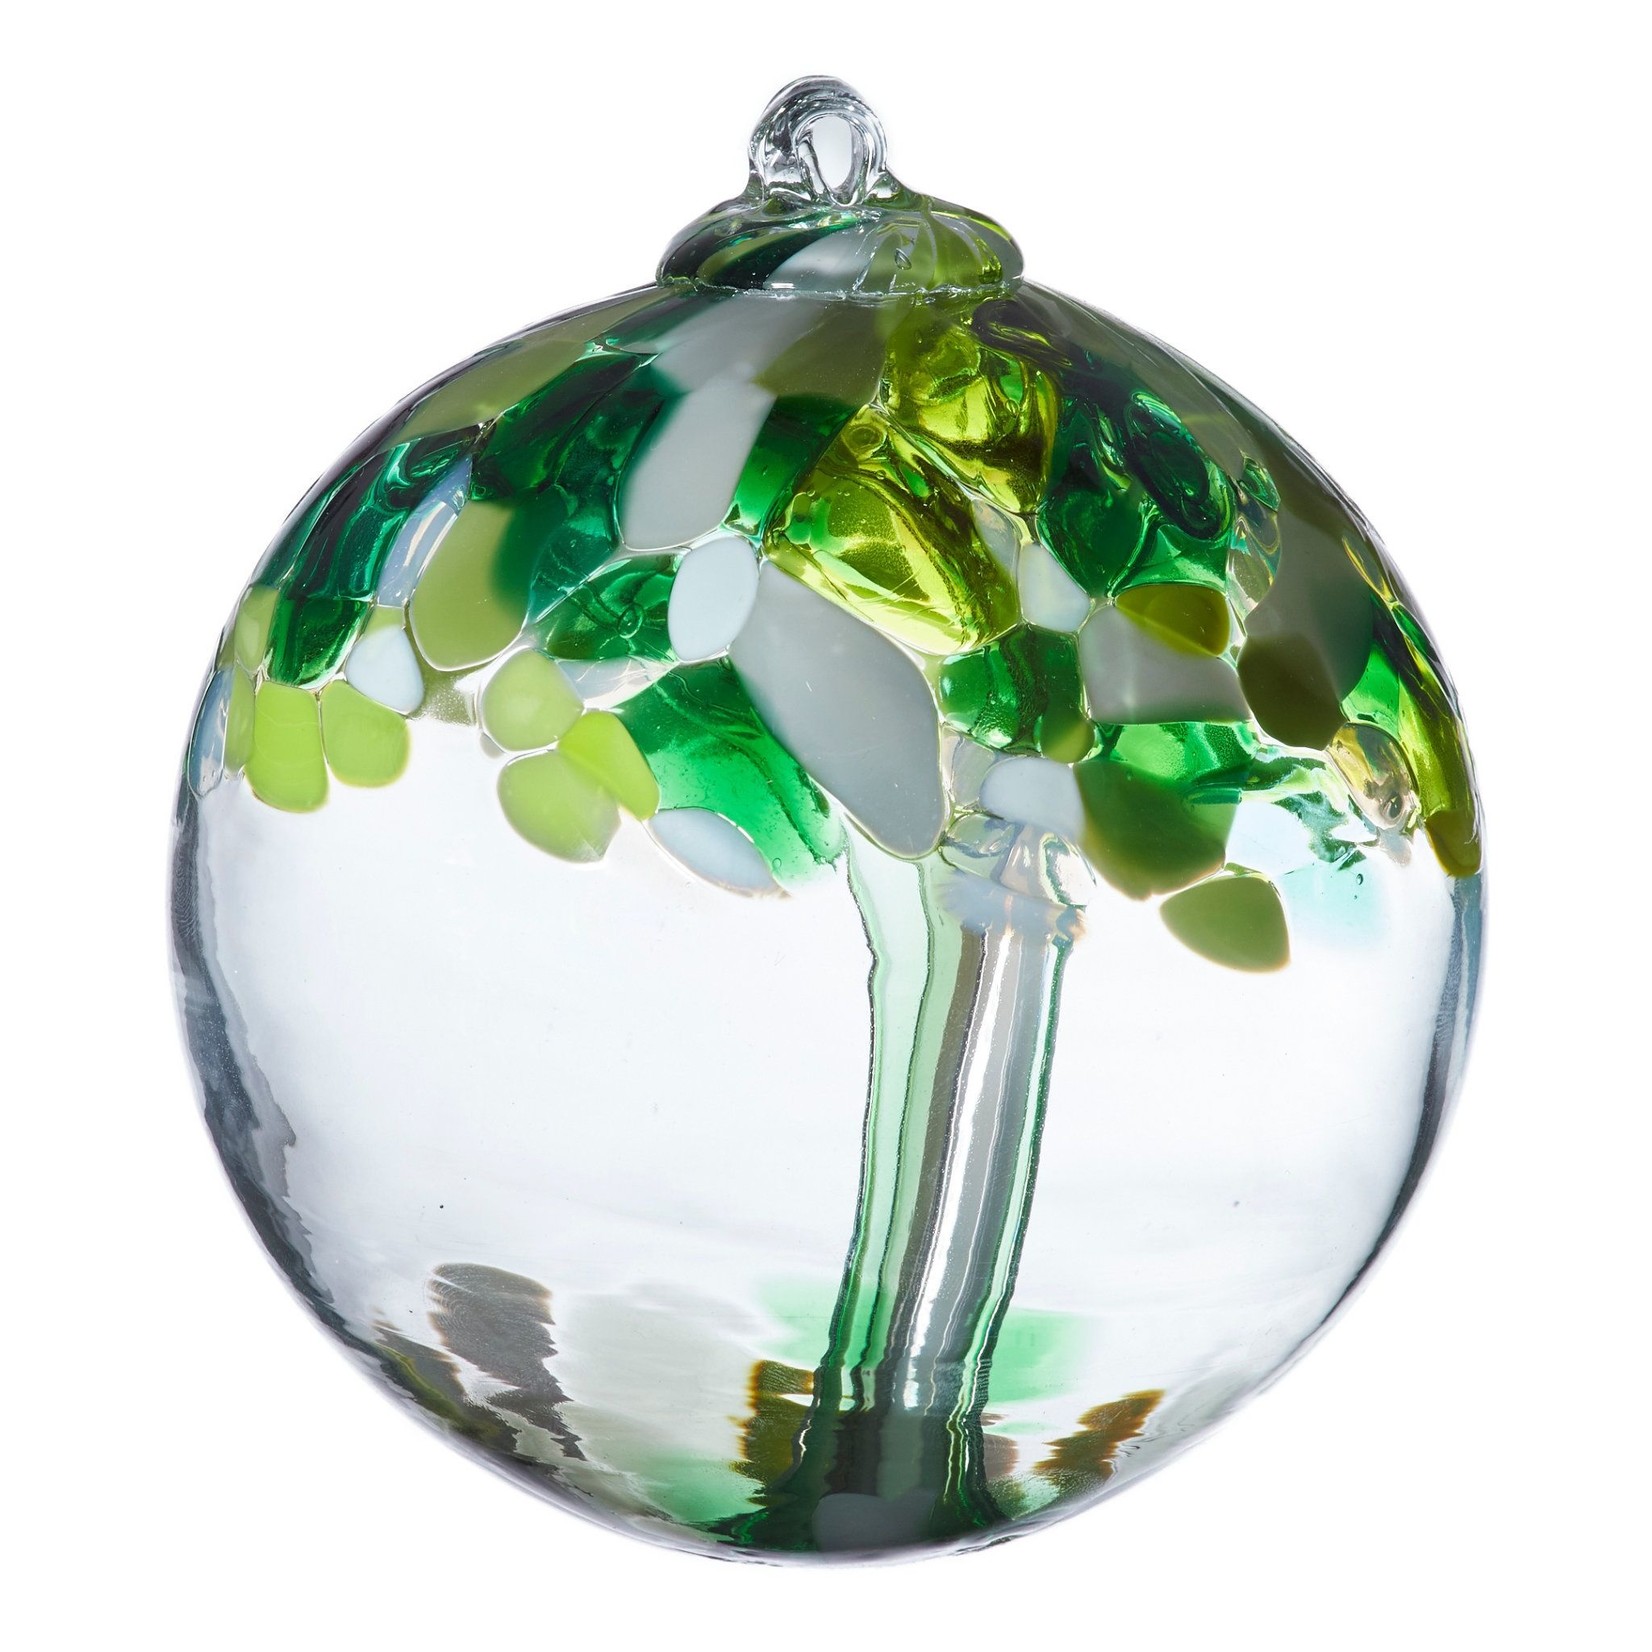 Kitras Art Glass Tree of Enchantment - 6" - Well Being